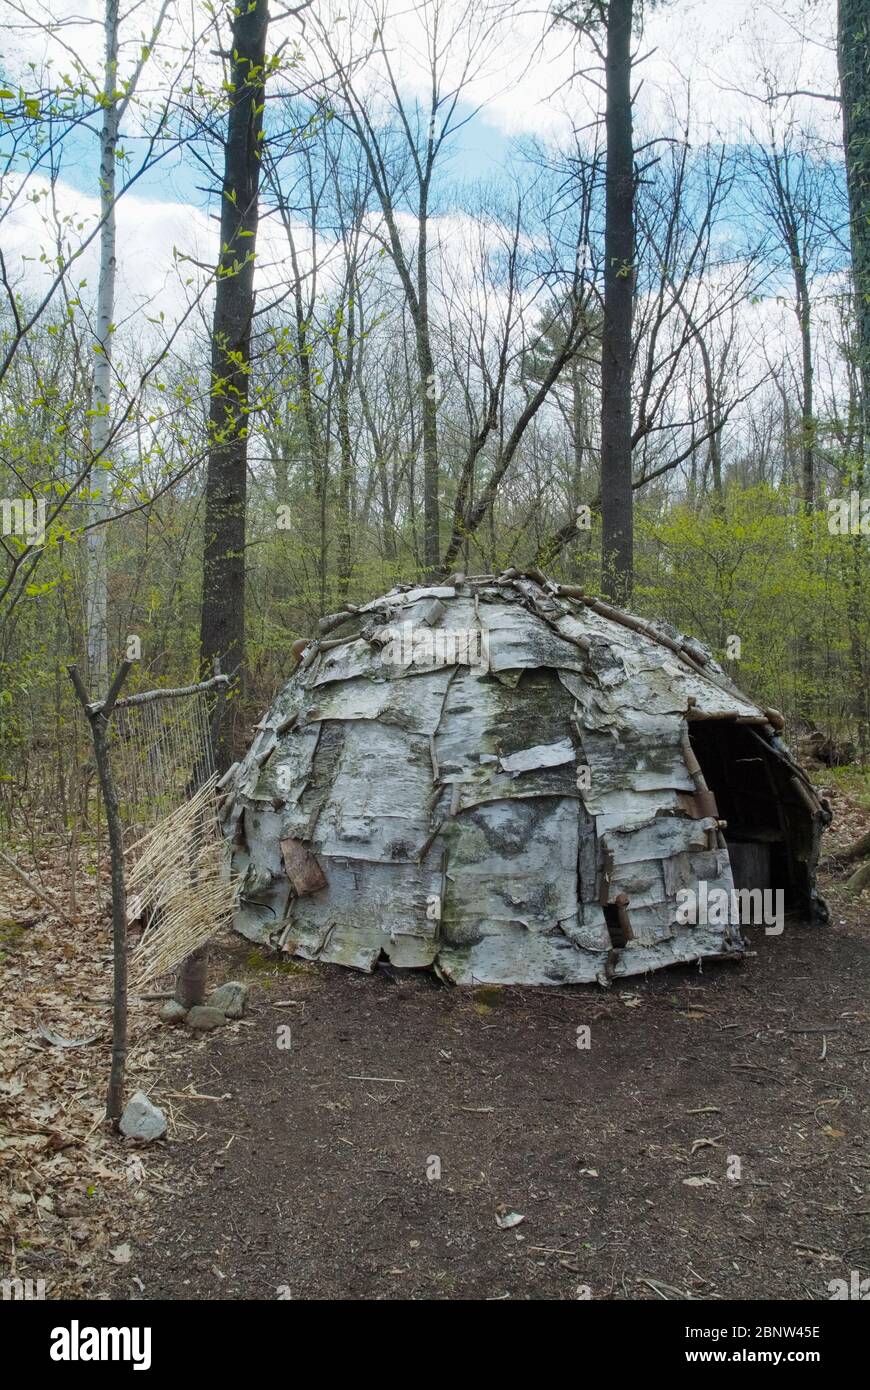 A wigwam at Sandy Point Discovery center in Stratham, New Hampshire. Wigwams are dome-shaped huts or tents that were used by Native American tribes. Stock Photo